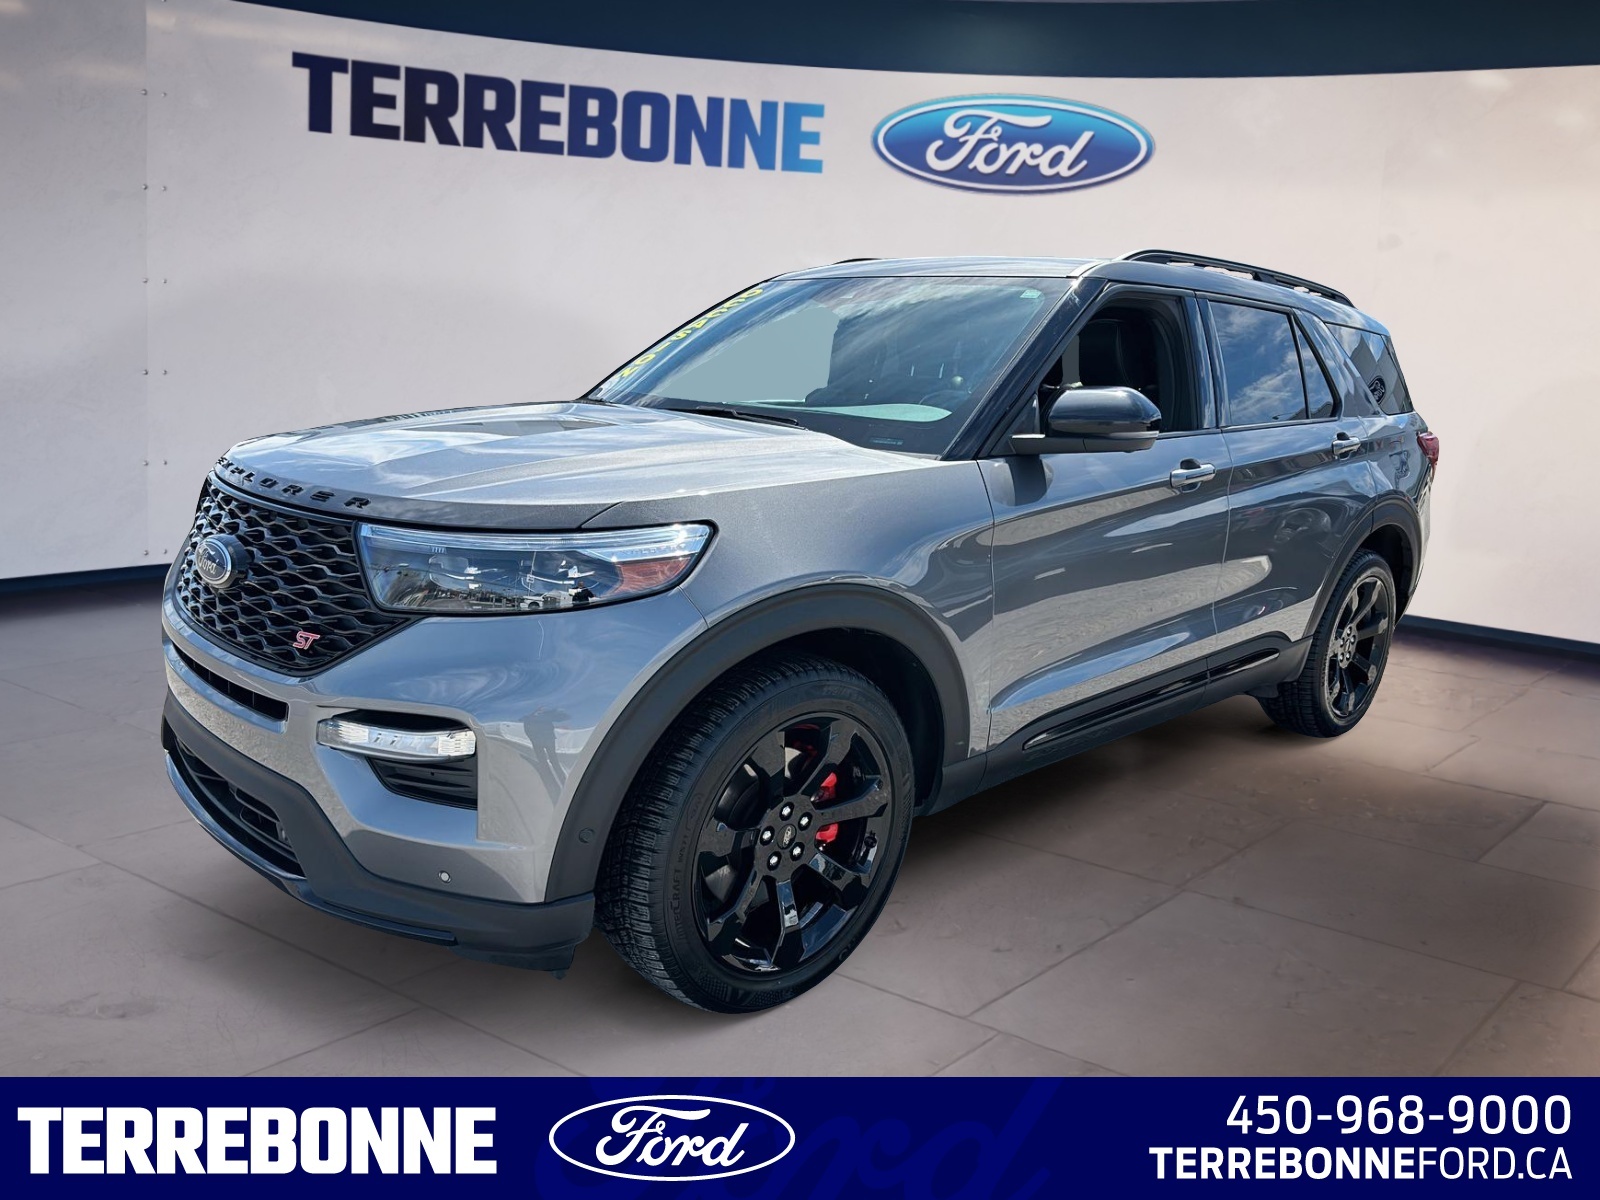 2021 Ford Explorer ST /3.0 L TURBO/MAGS 21 PO/TOIT/GPS/6 PASSAGERS